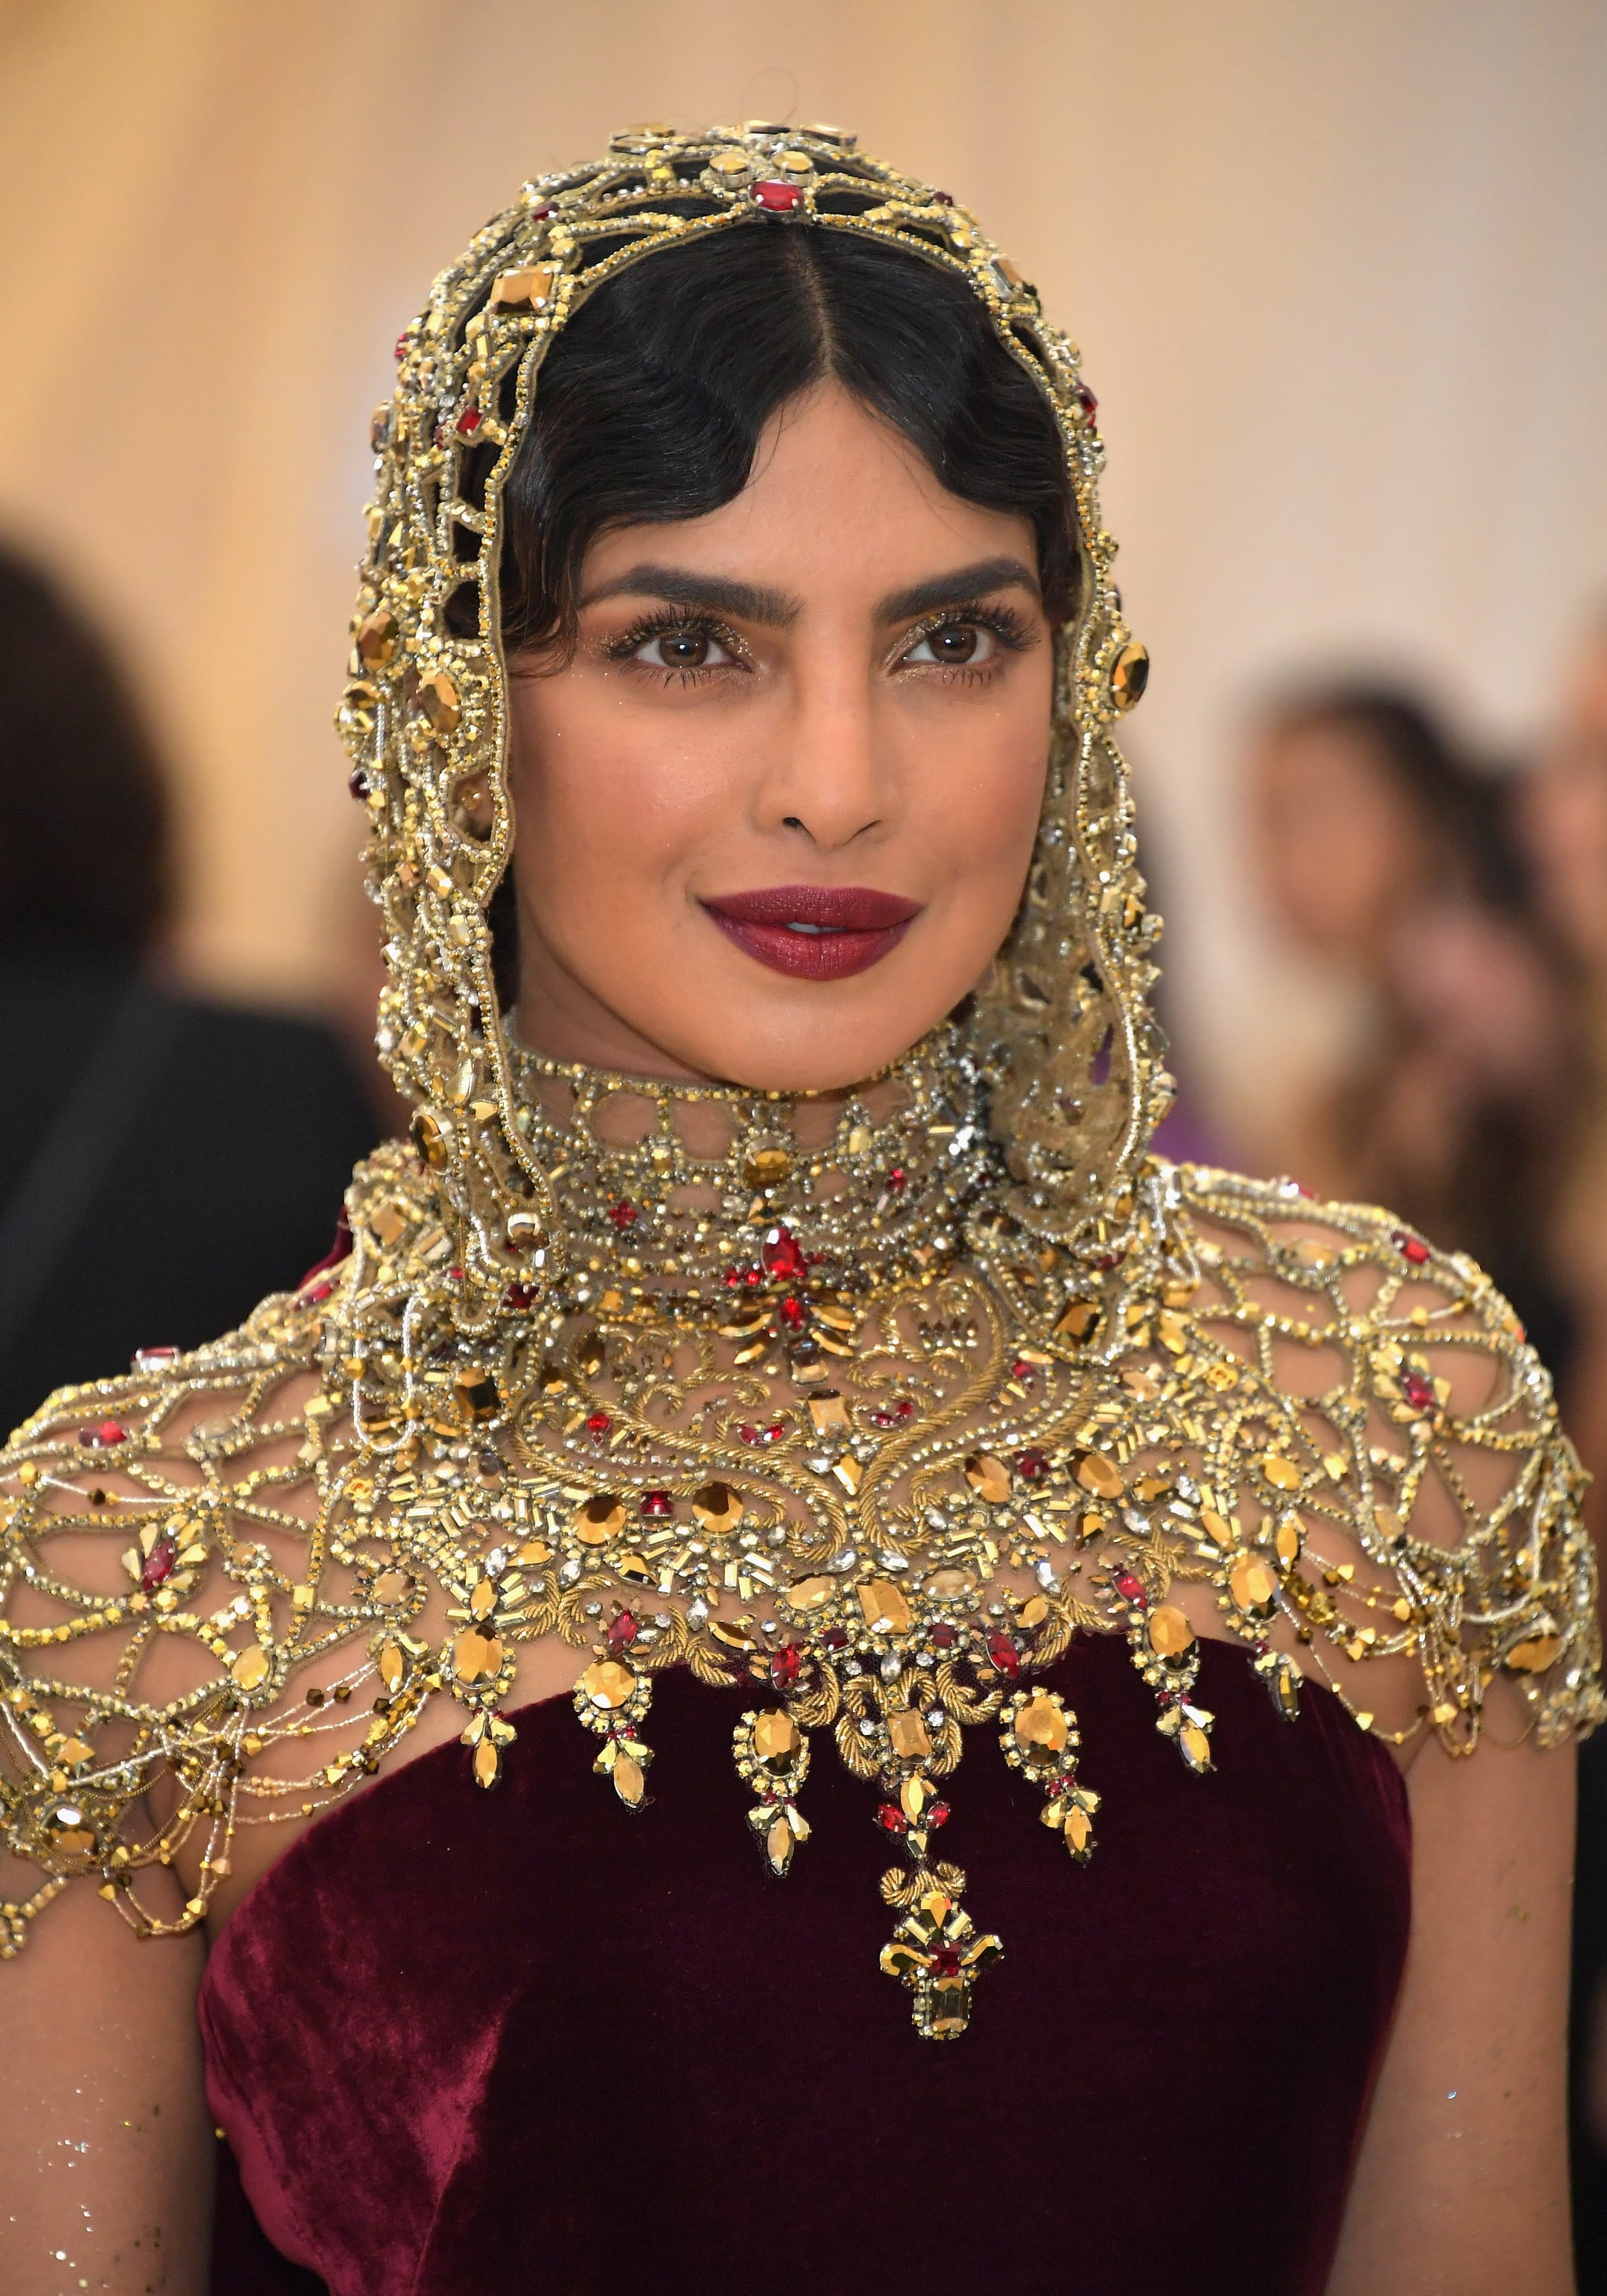 NEW YORK, NY - MAY 07:  Priyanka Chopra attends the Heavenly Bodies: Fashion & The Catholic Imagination Costume Institute Gala at The Metropolitan Museum of Art on May 7, 2018 in New York City.  (Photo by Neilson Barnard/Getty Images)